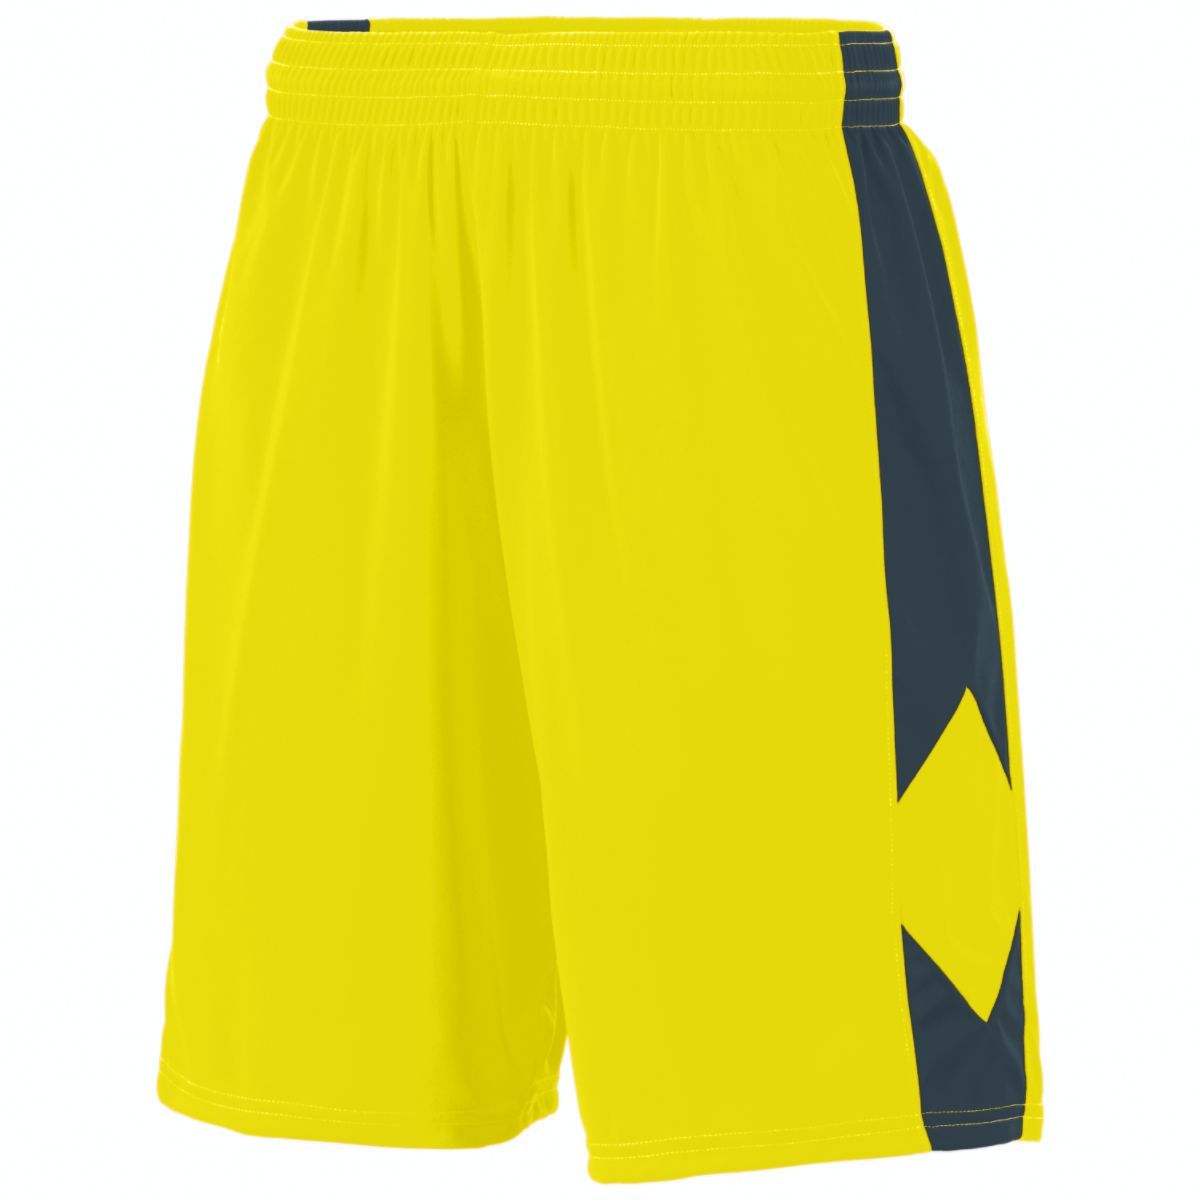 Augusta Sportswear Youth Block Out Shorts in Power Yellow/Slate  -Part of the Youth, Youth-Shorts, Augusta-Products, Basketball, All-Sports, All-Sports-1 product lines at KanaleyCreations.com